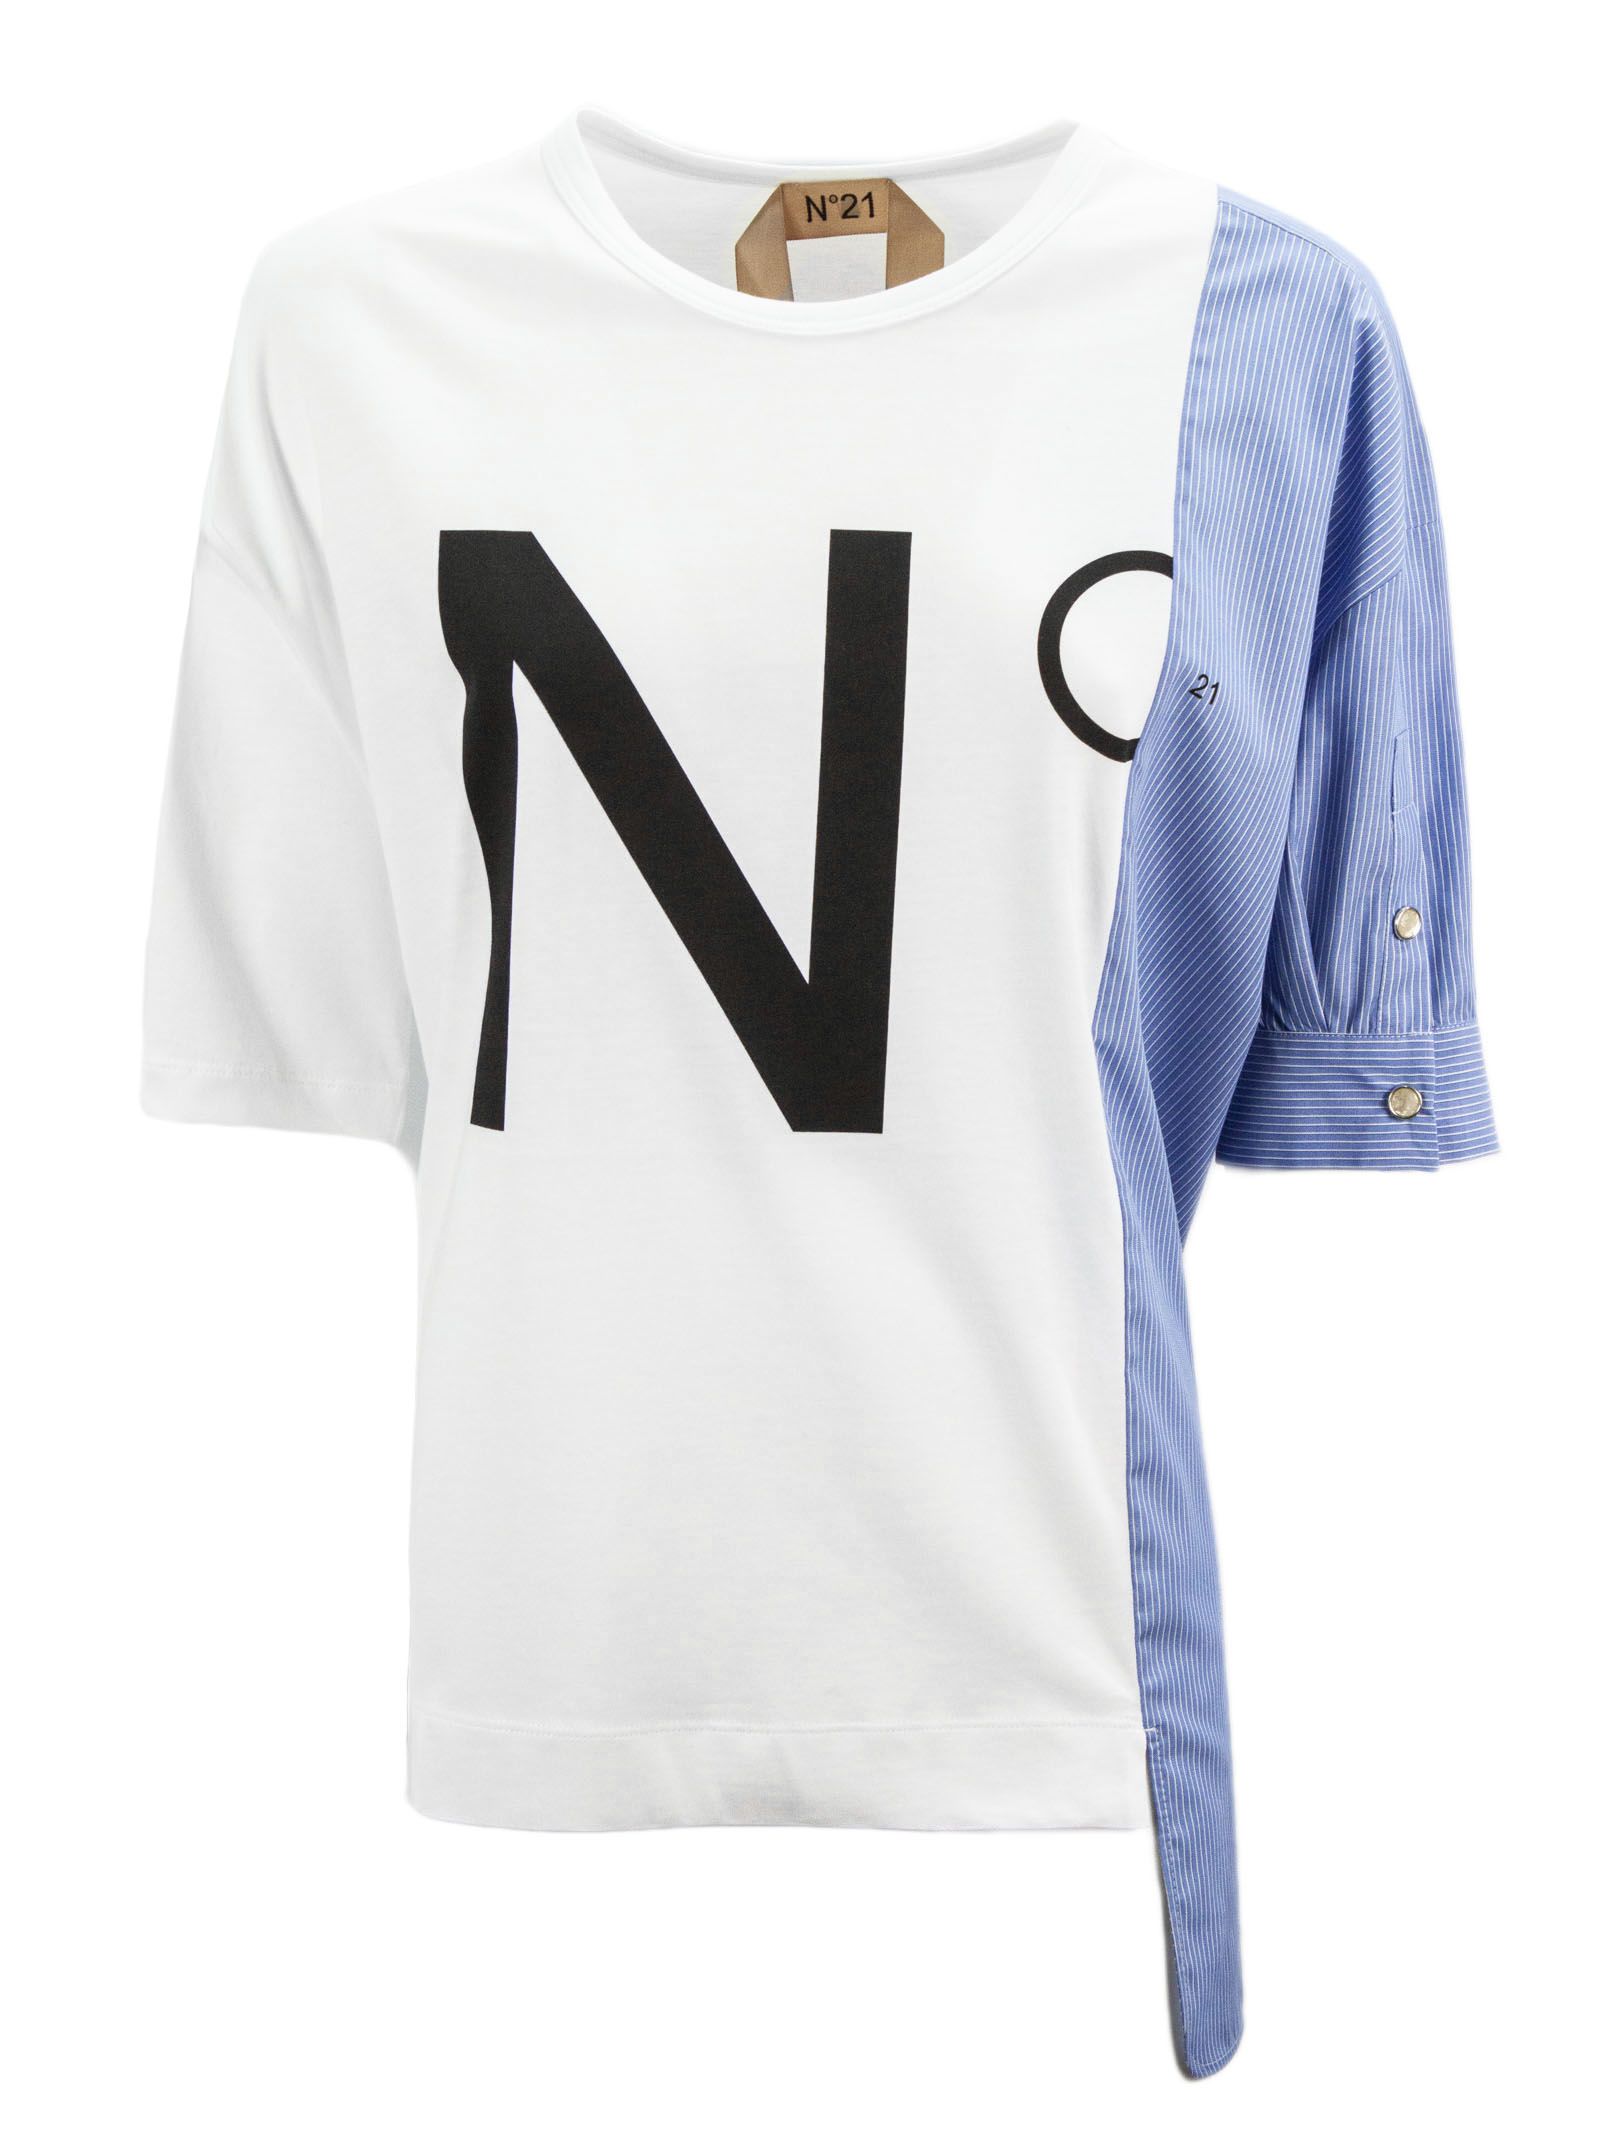 N°21 WHITE AND BLUE COTTON T-SHIRT,10862644